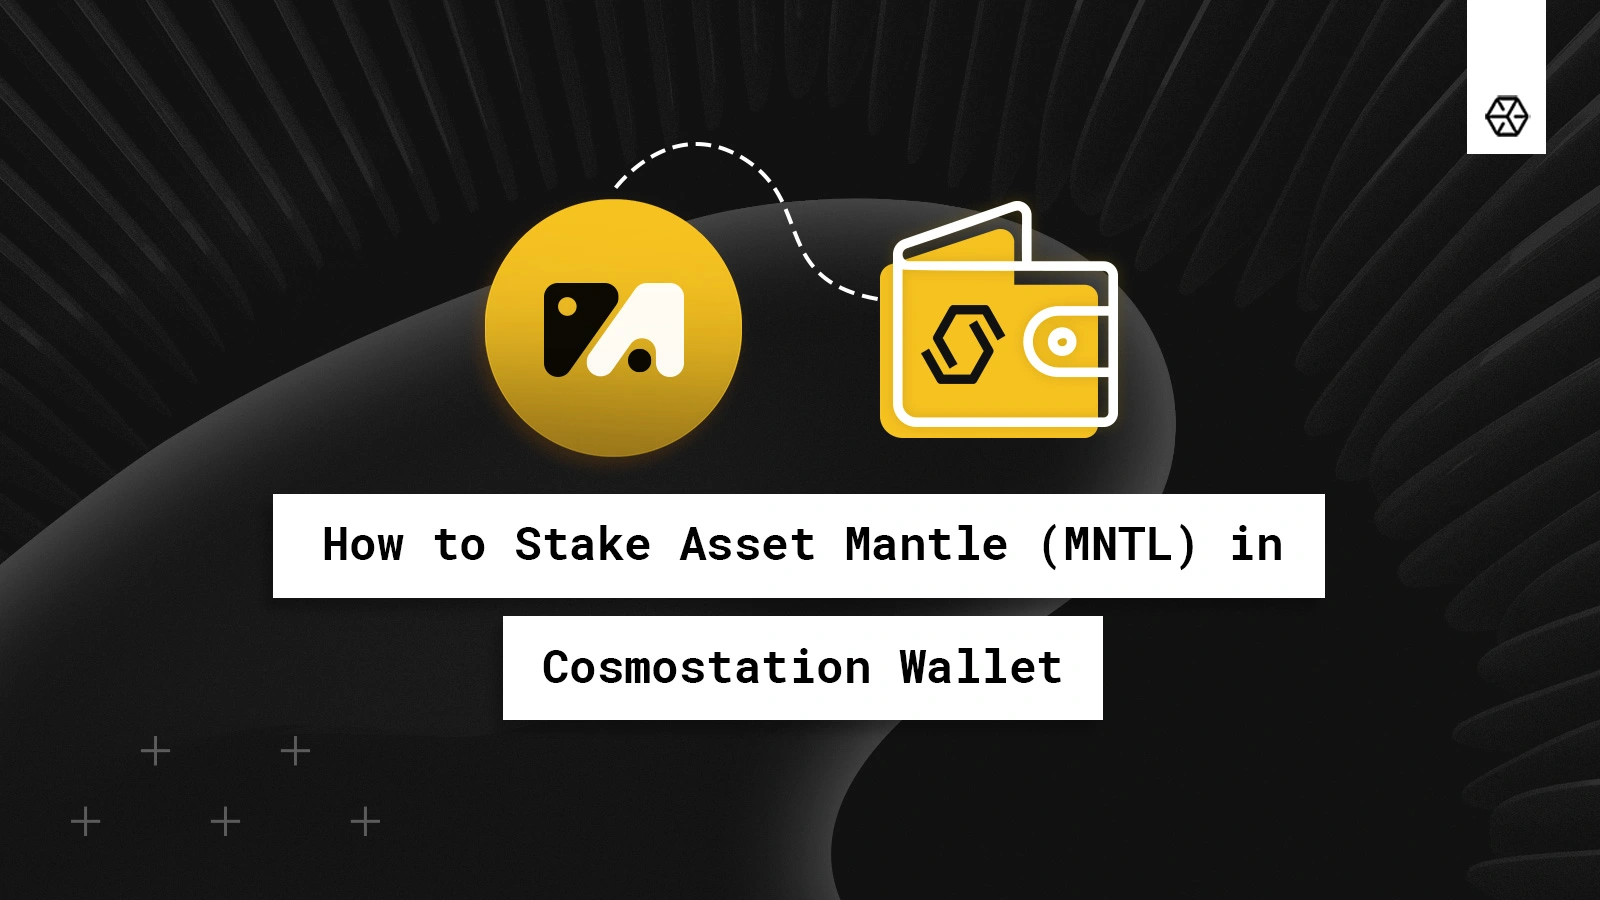 How to Stake Asset Mantle (MNTL) in Cosmostation Wallet